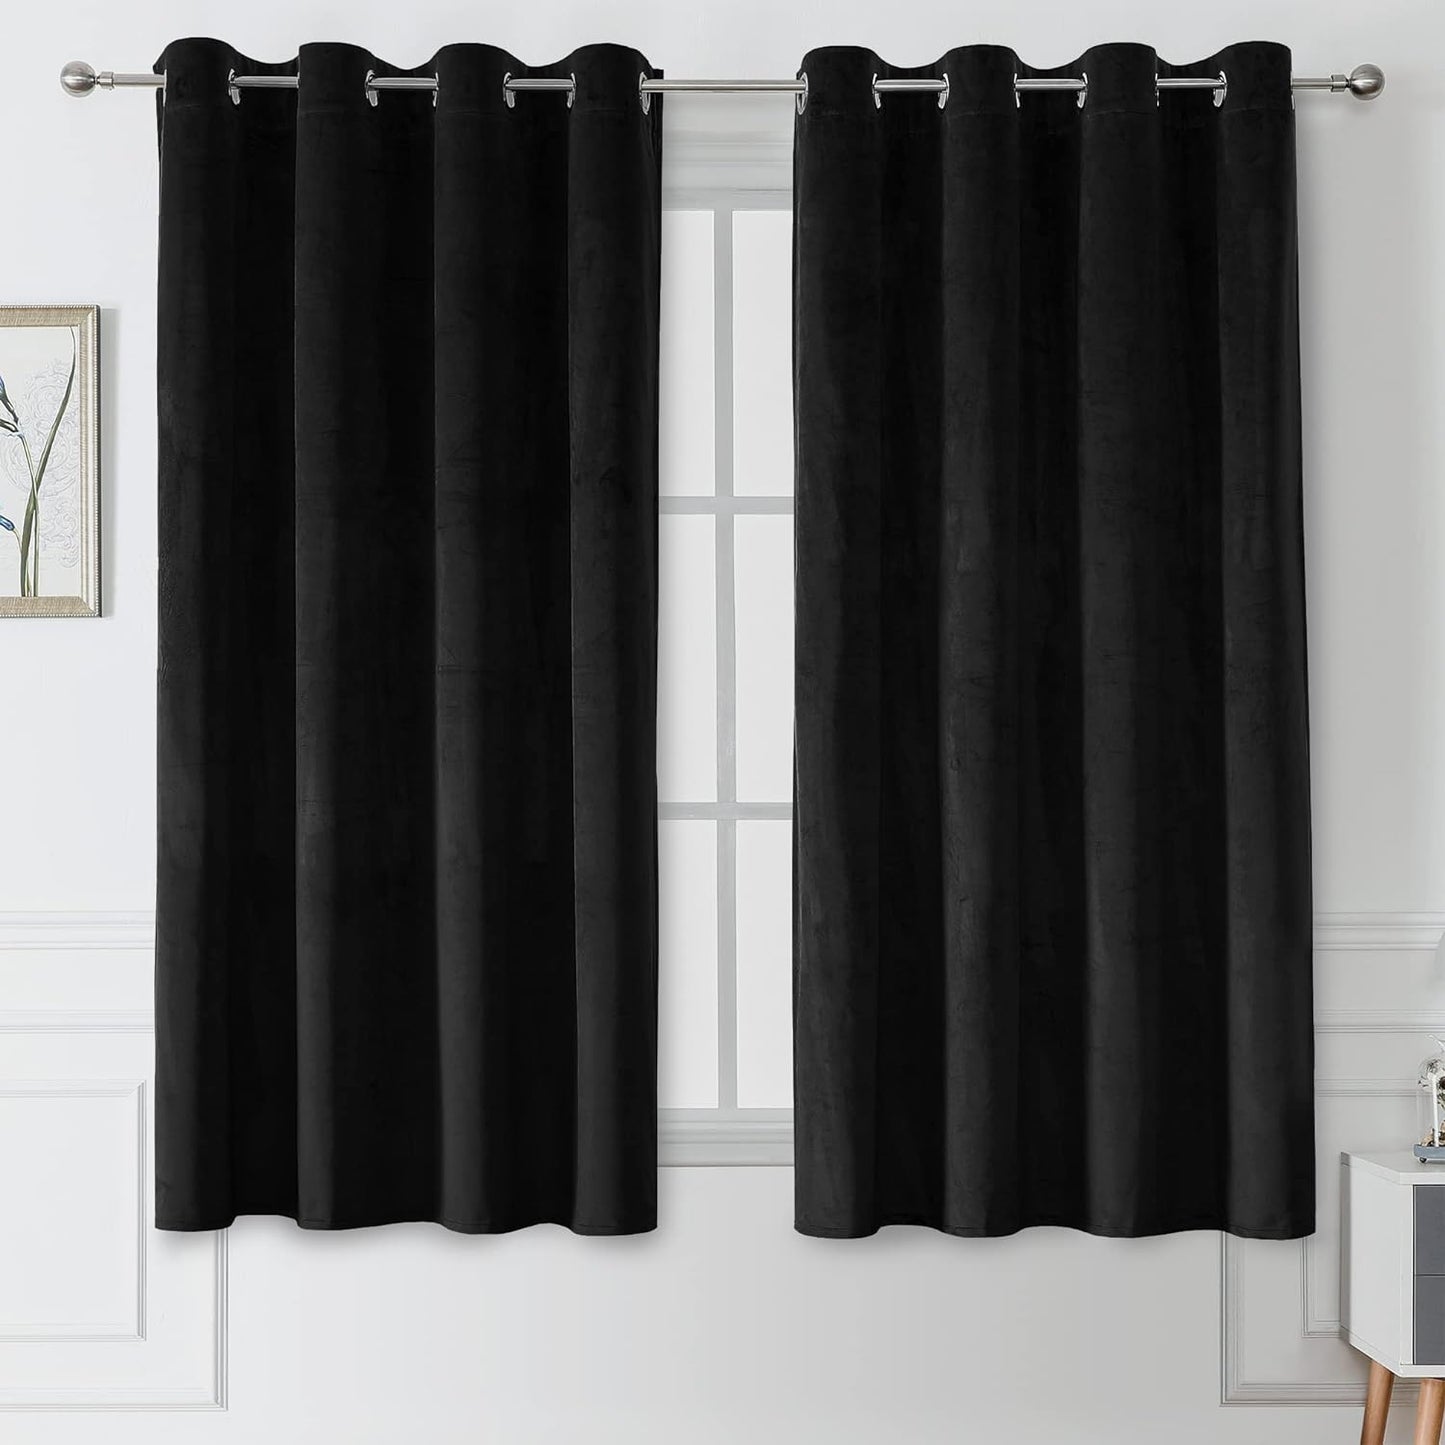 Victree Velvet Curtains for Bedroom, Blackout Curtains 52 X 84 Inch Length - Room Darkening Sun Light Blocking Grommet Window Drapes for Living Room, 2 Panels, Navy  Victree Black 52 X 63 Inches 